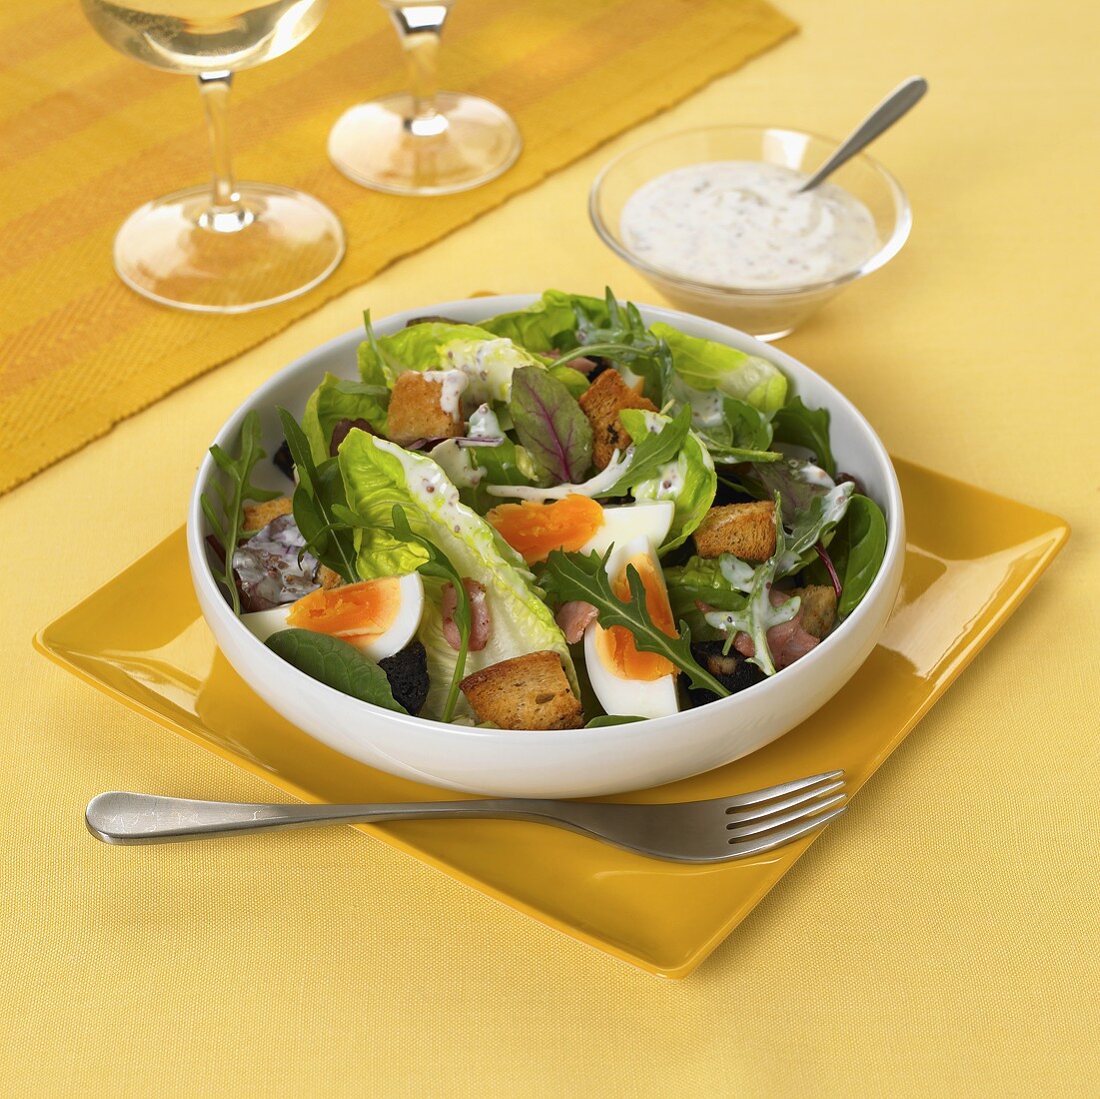 Mixed salad with egg, croutons and yoghurt dressing